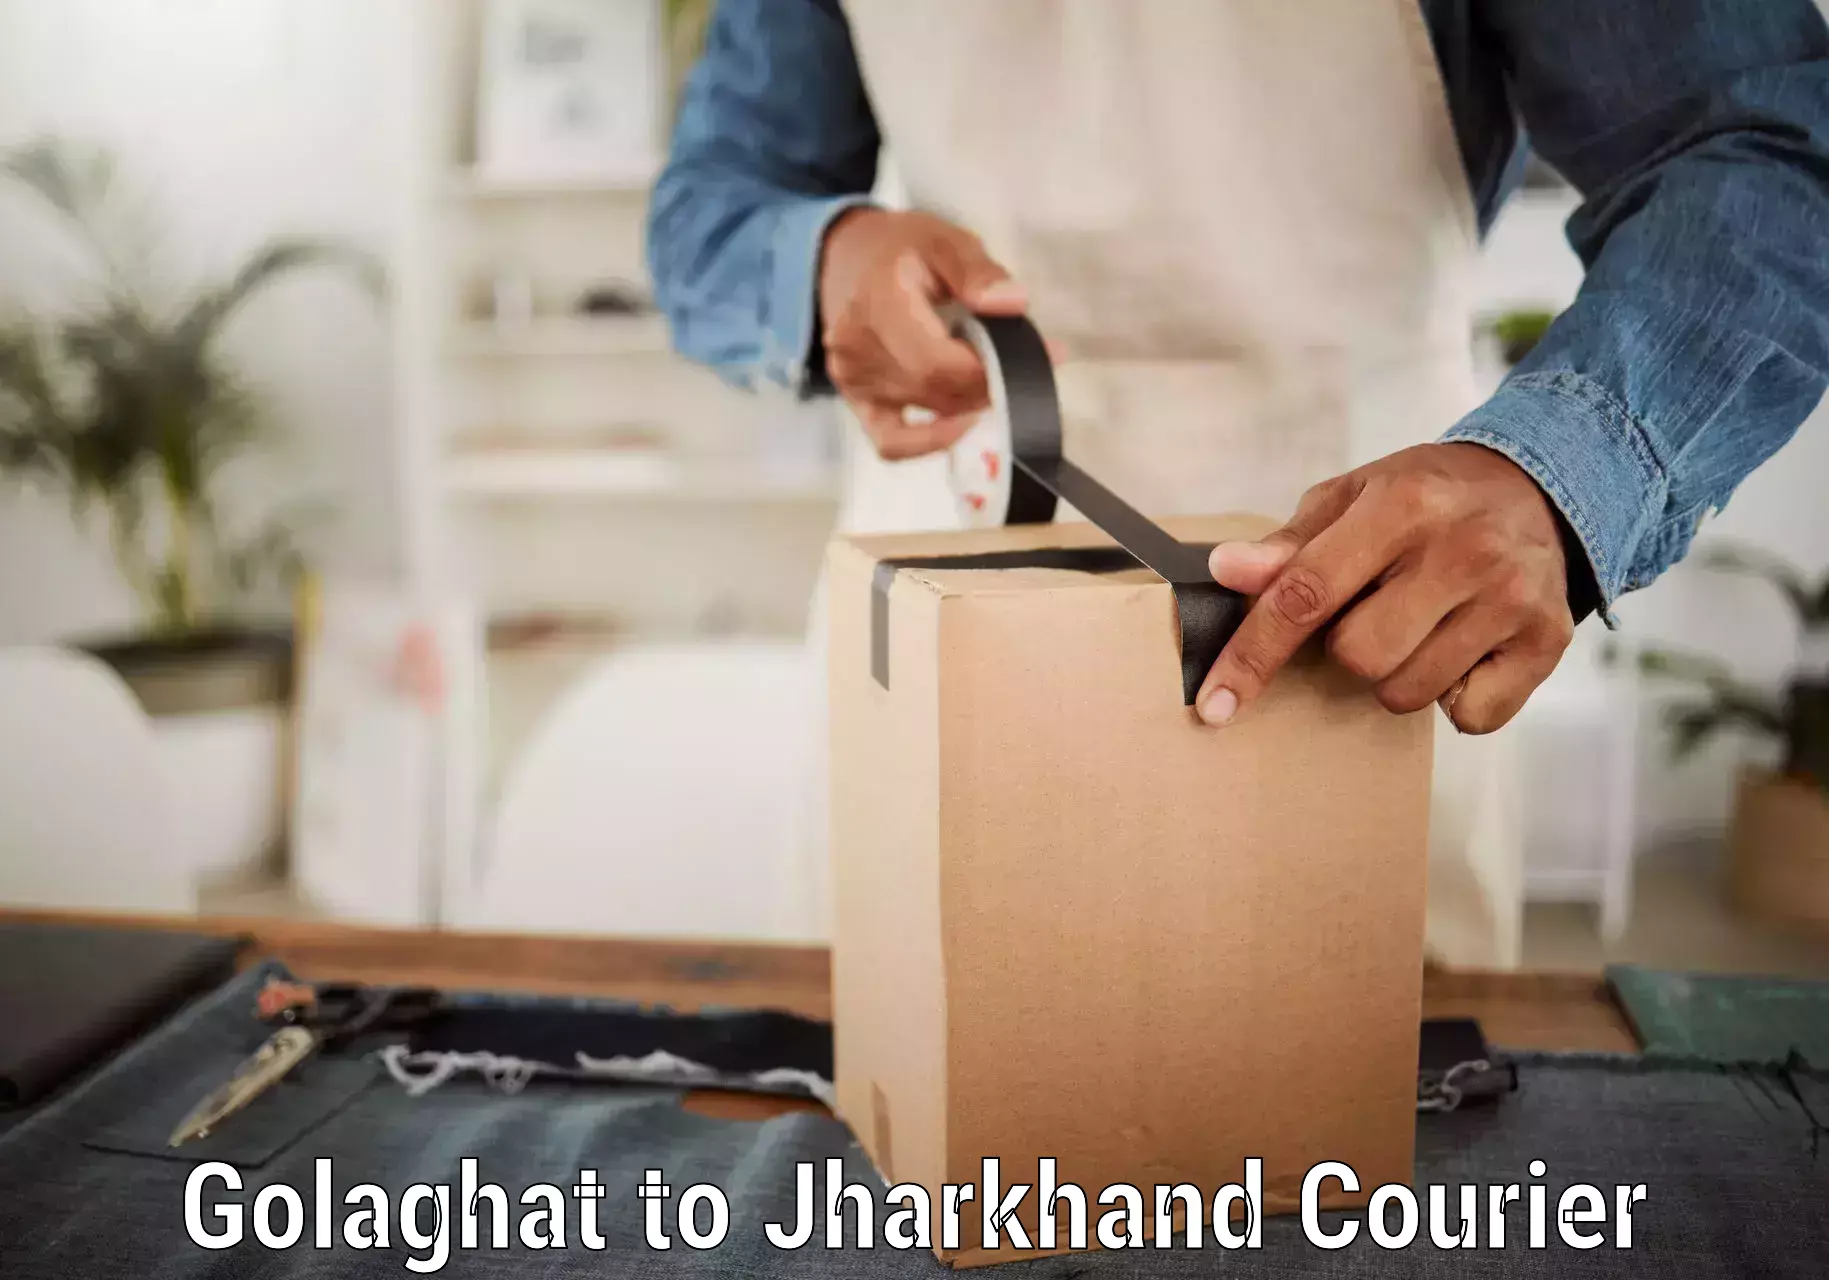 Speedy delivery service Golaghat to Jharkhand